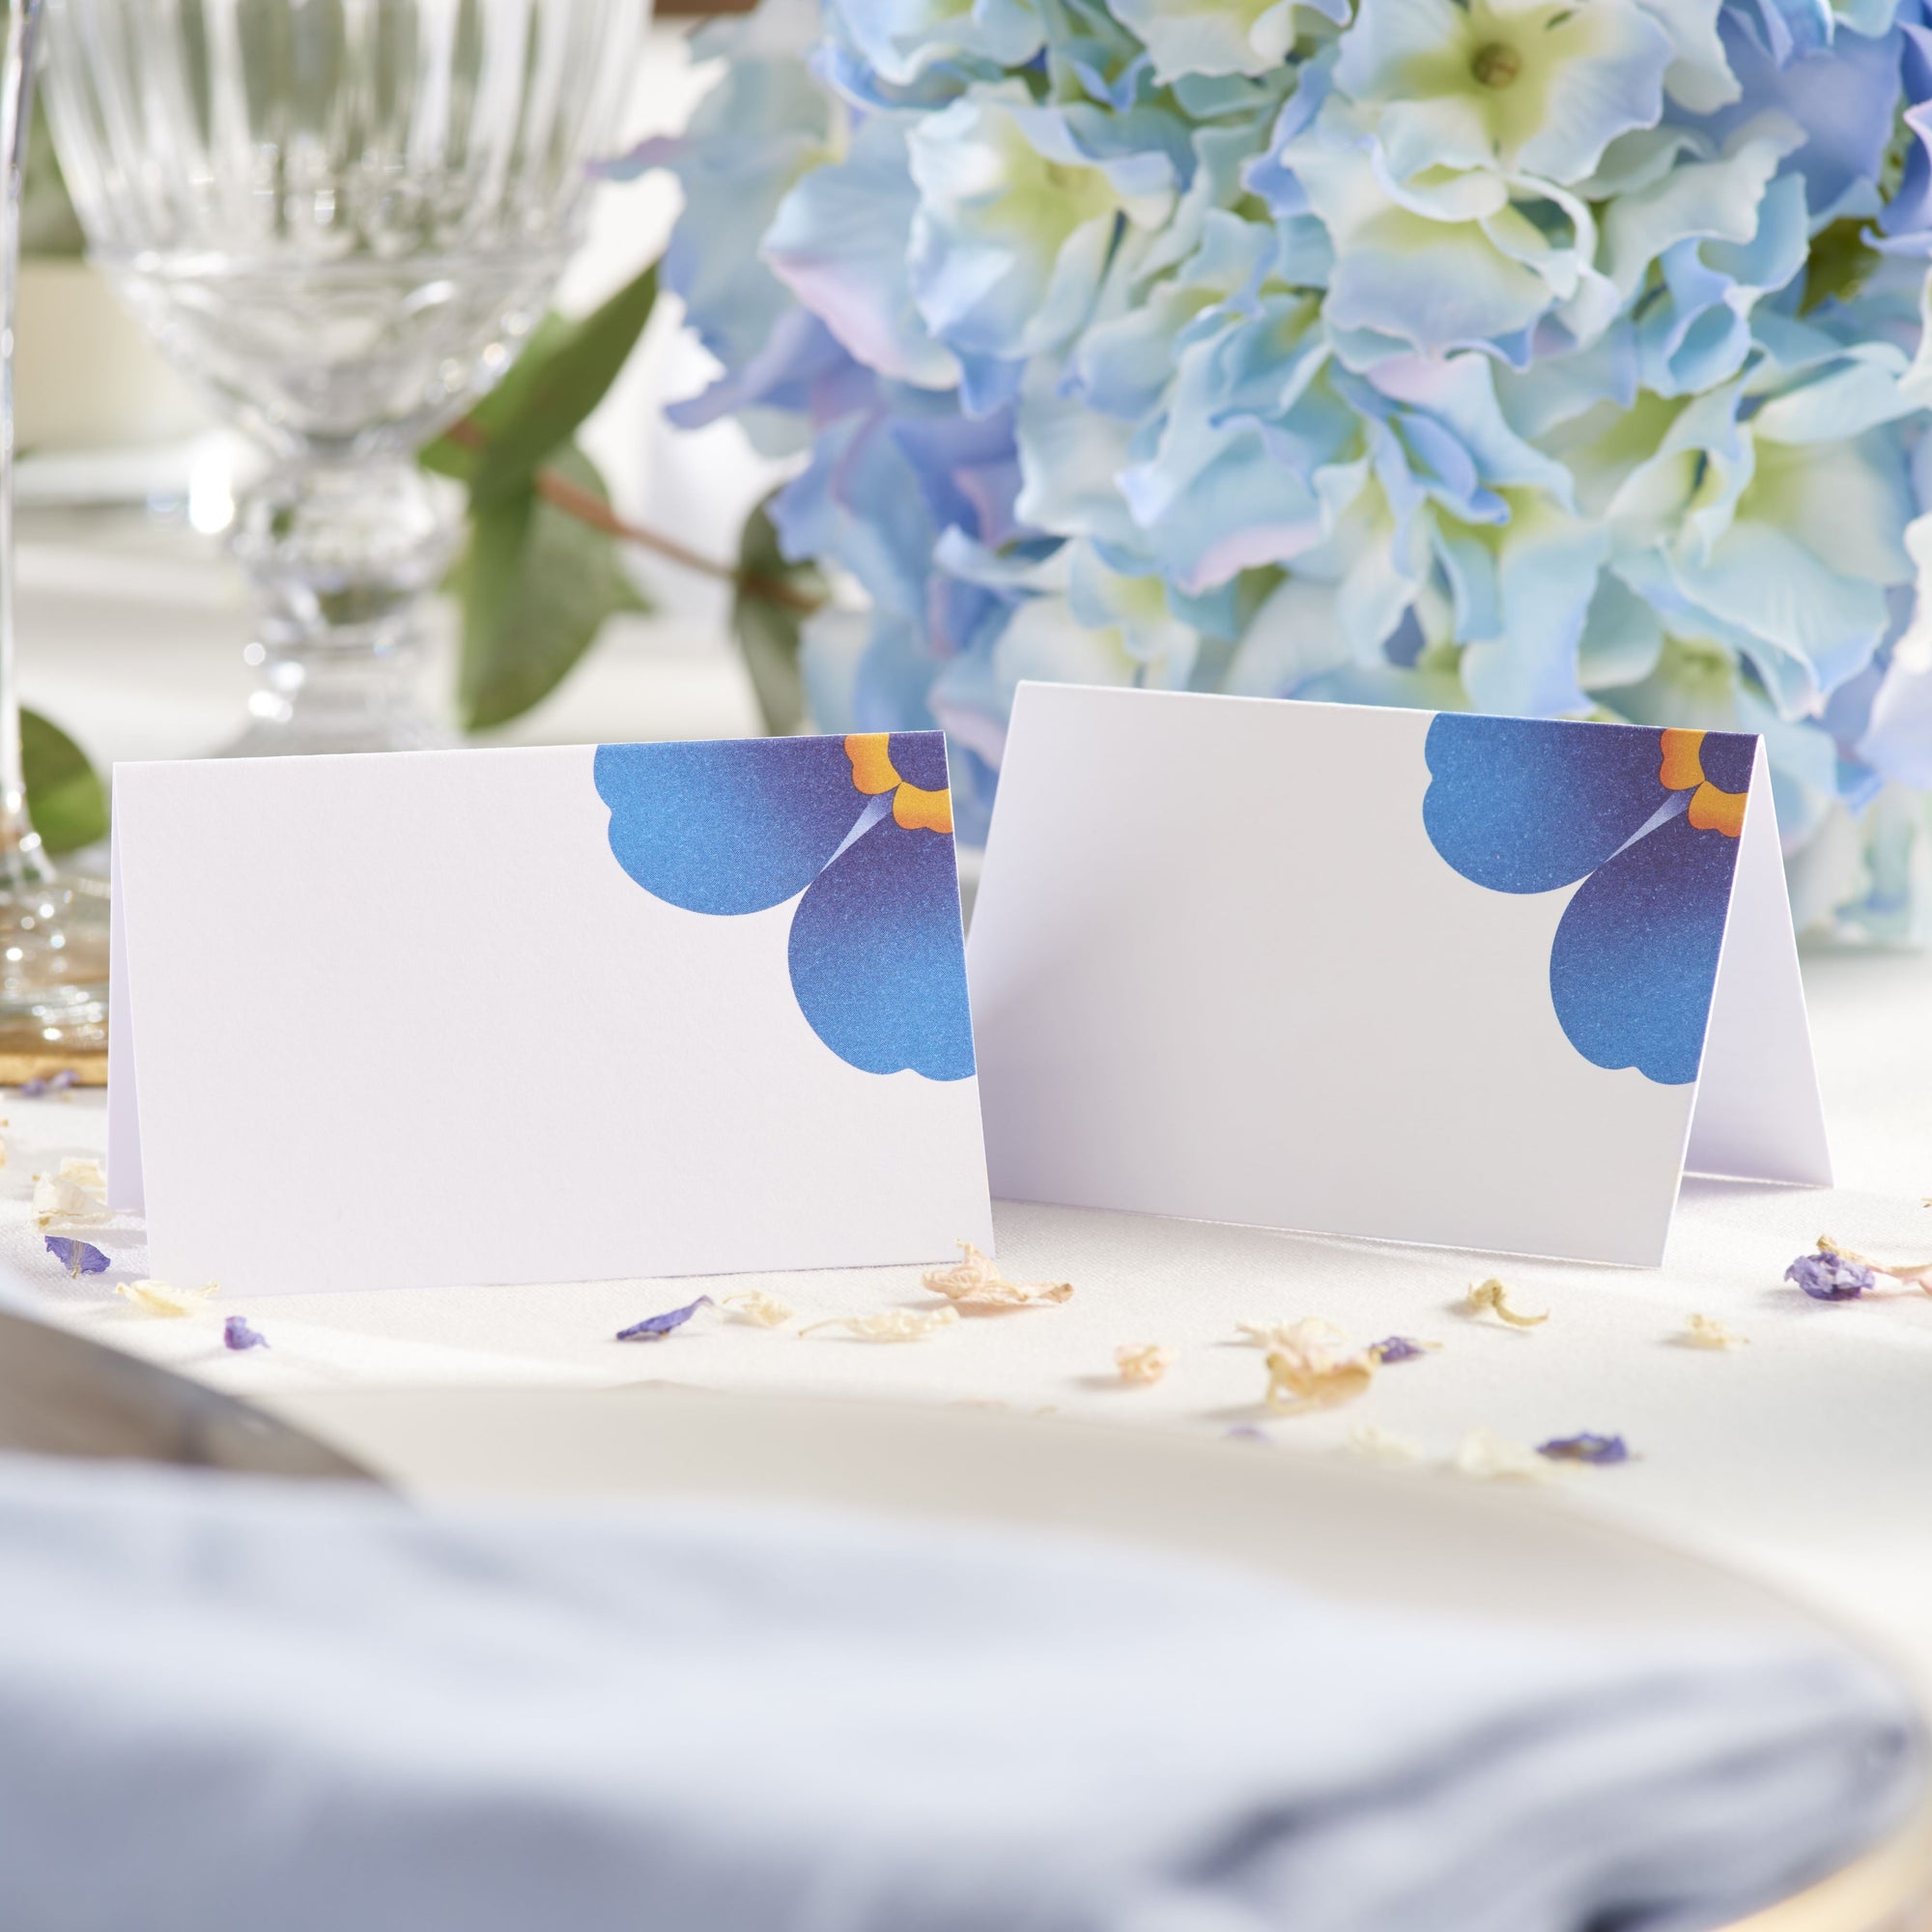 Forget-me-not flower wedding table cards x 10